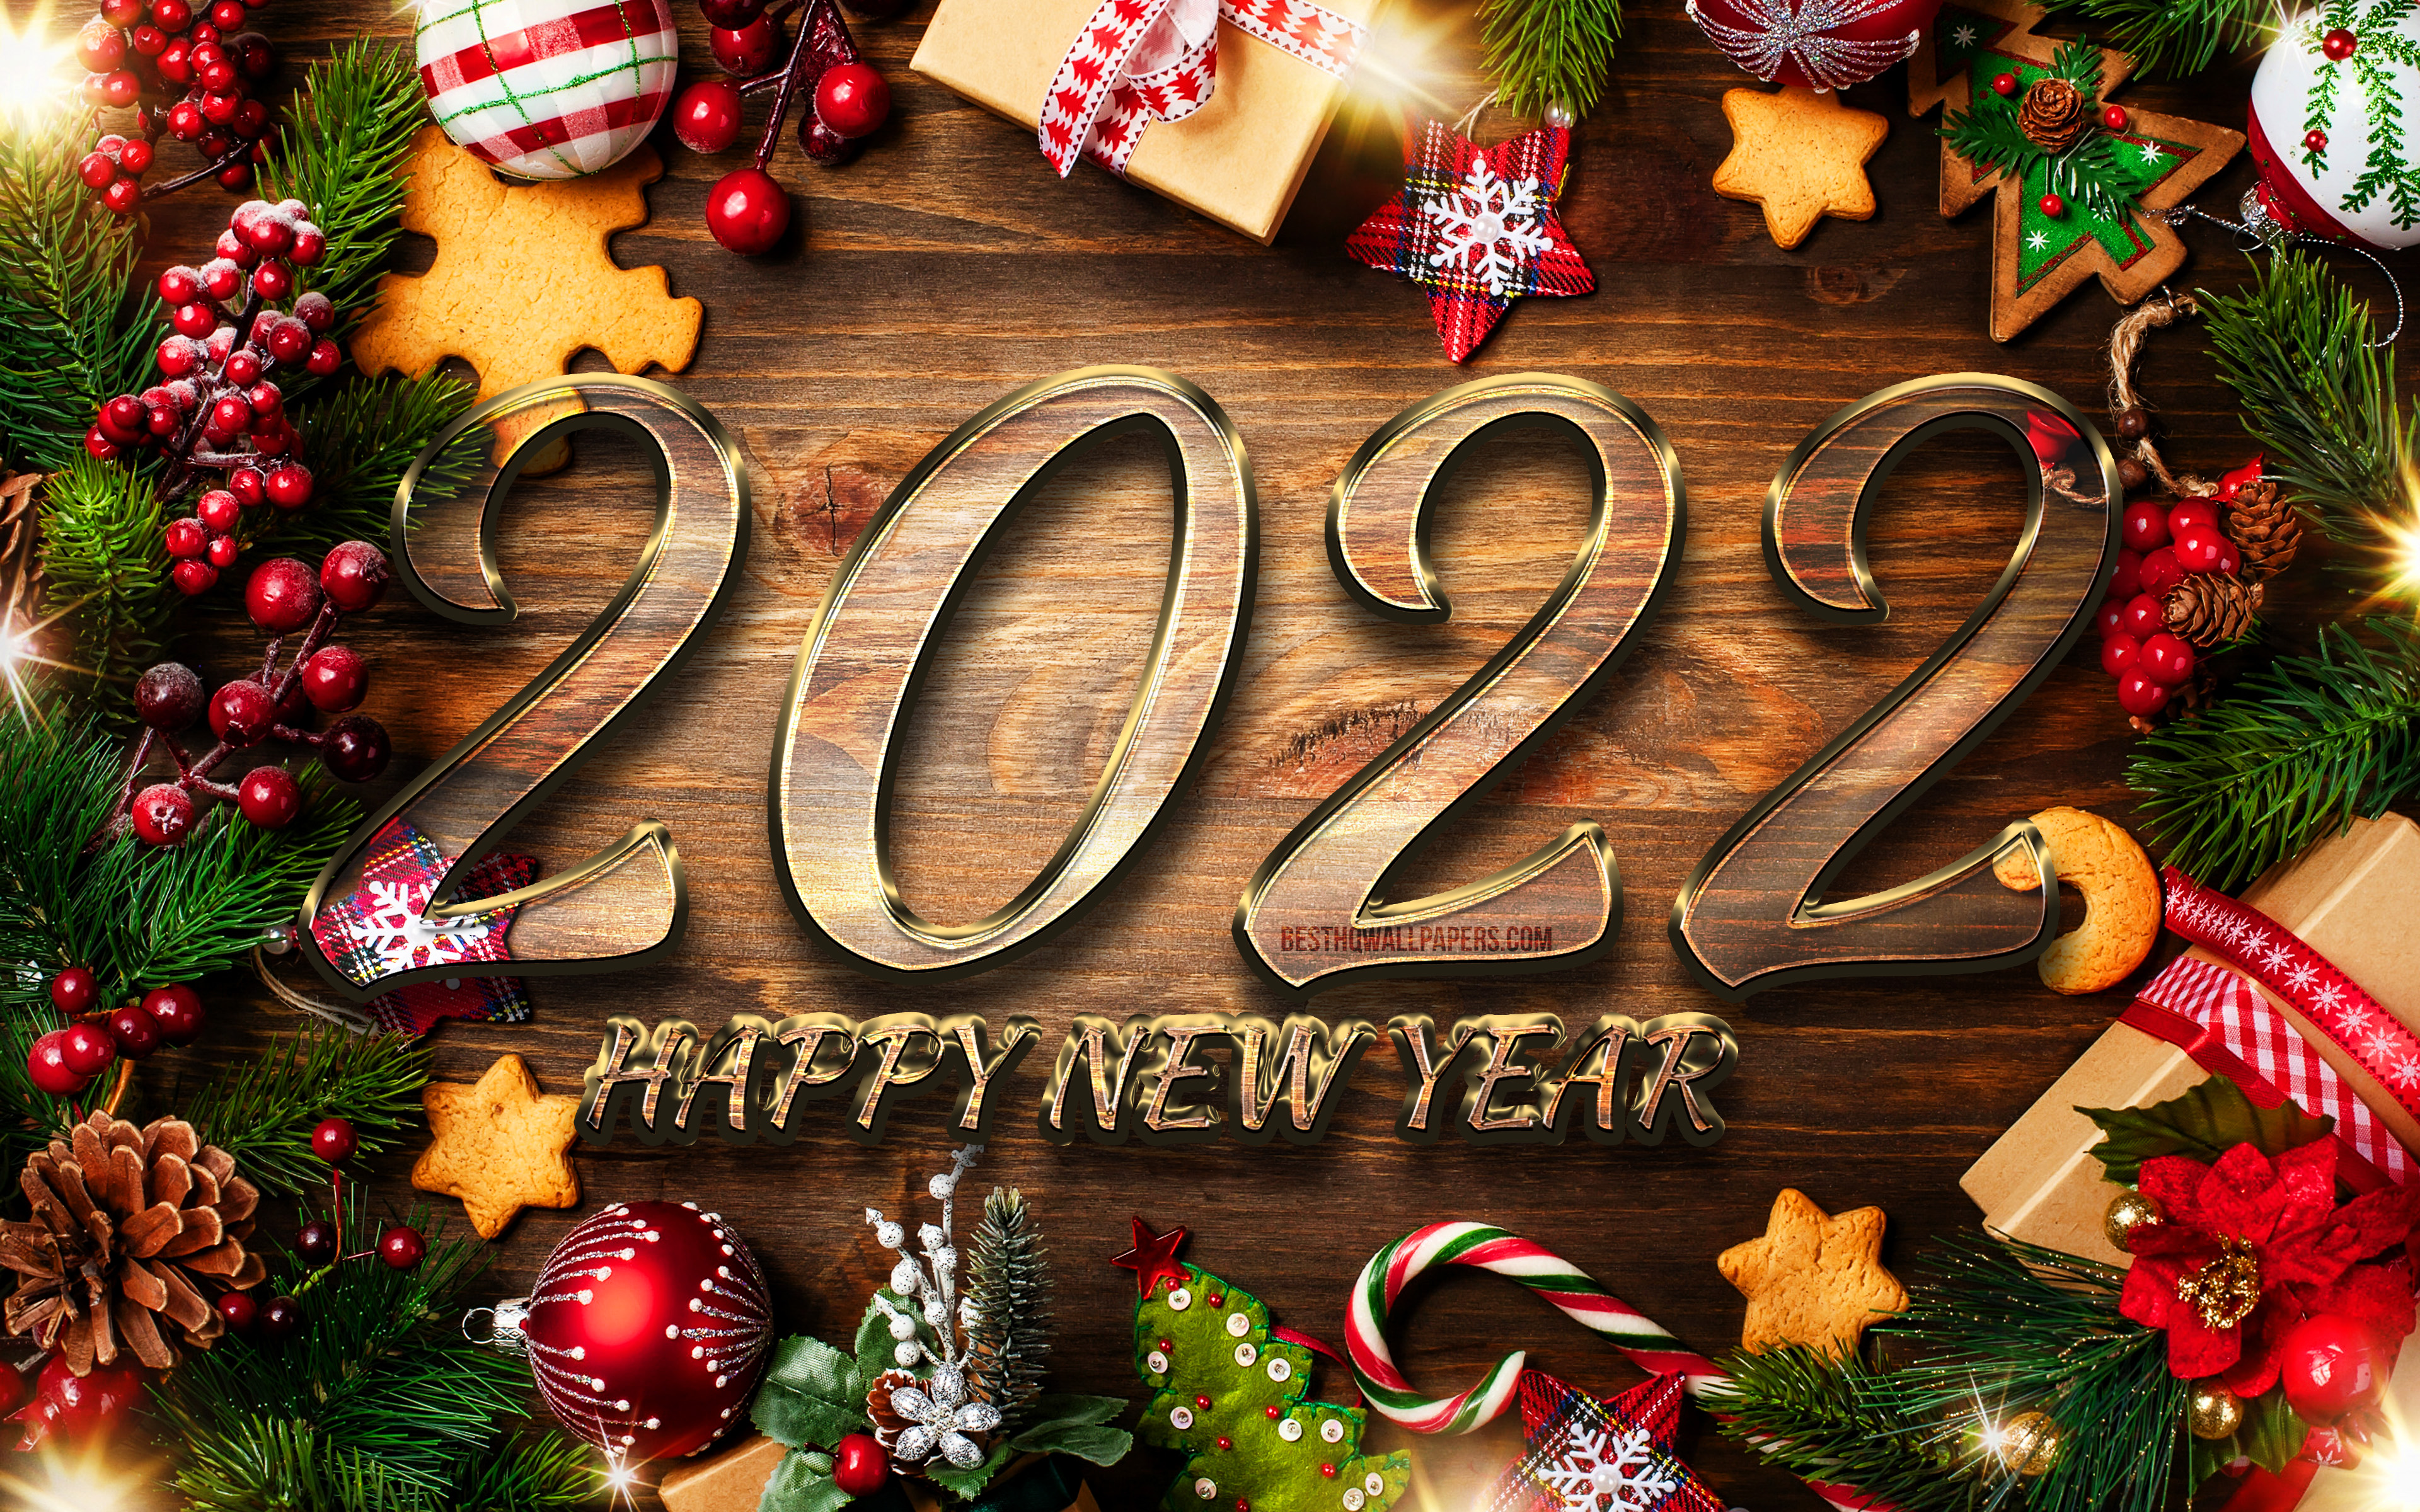 Download wallpaper 4k, 2022 golden 3D digits, christmas frames, Happy New Year wooden background, 2022 concepts, 3D art, 2022 new year, 2022 on wooden background, 2022 year digits, Christmas 2022 for